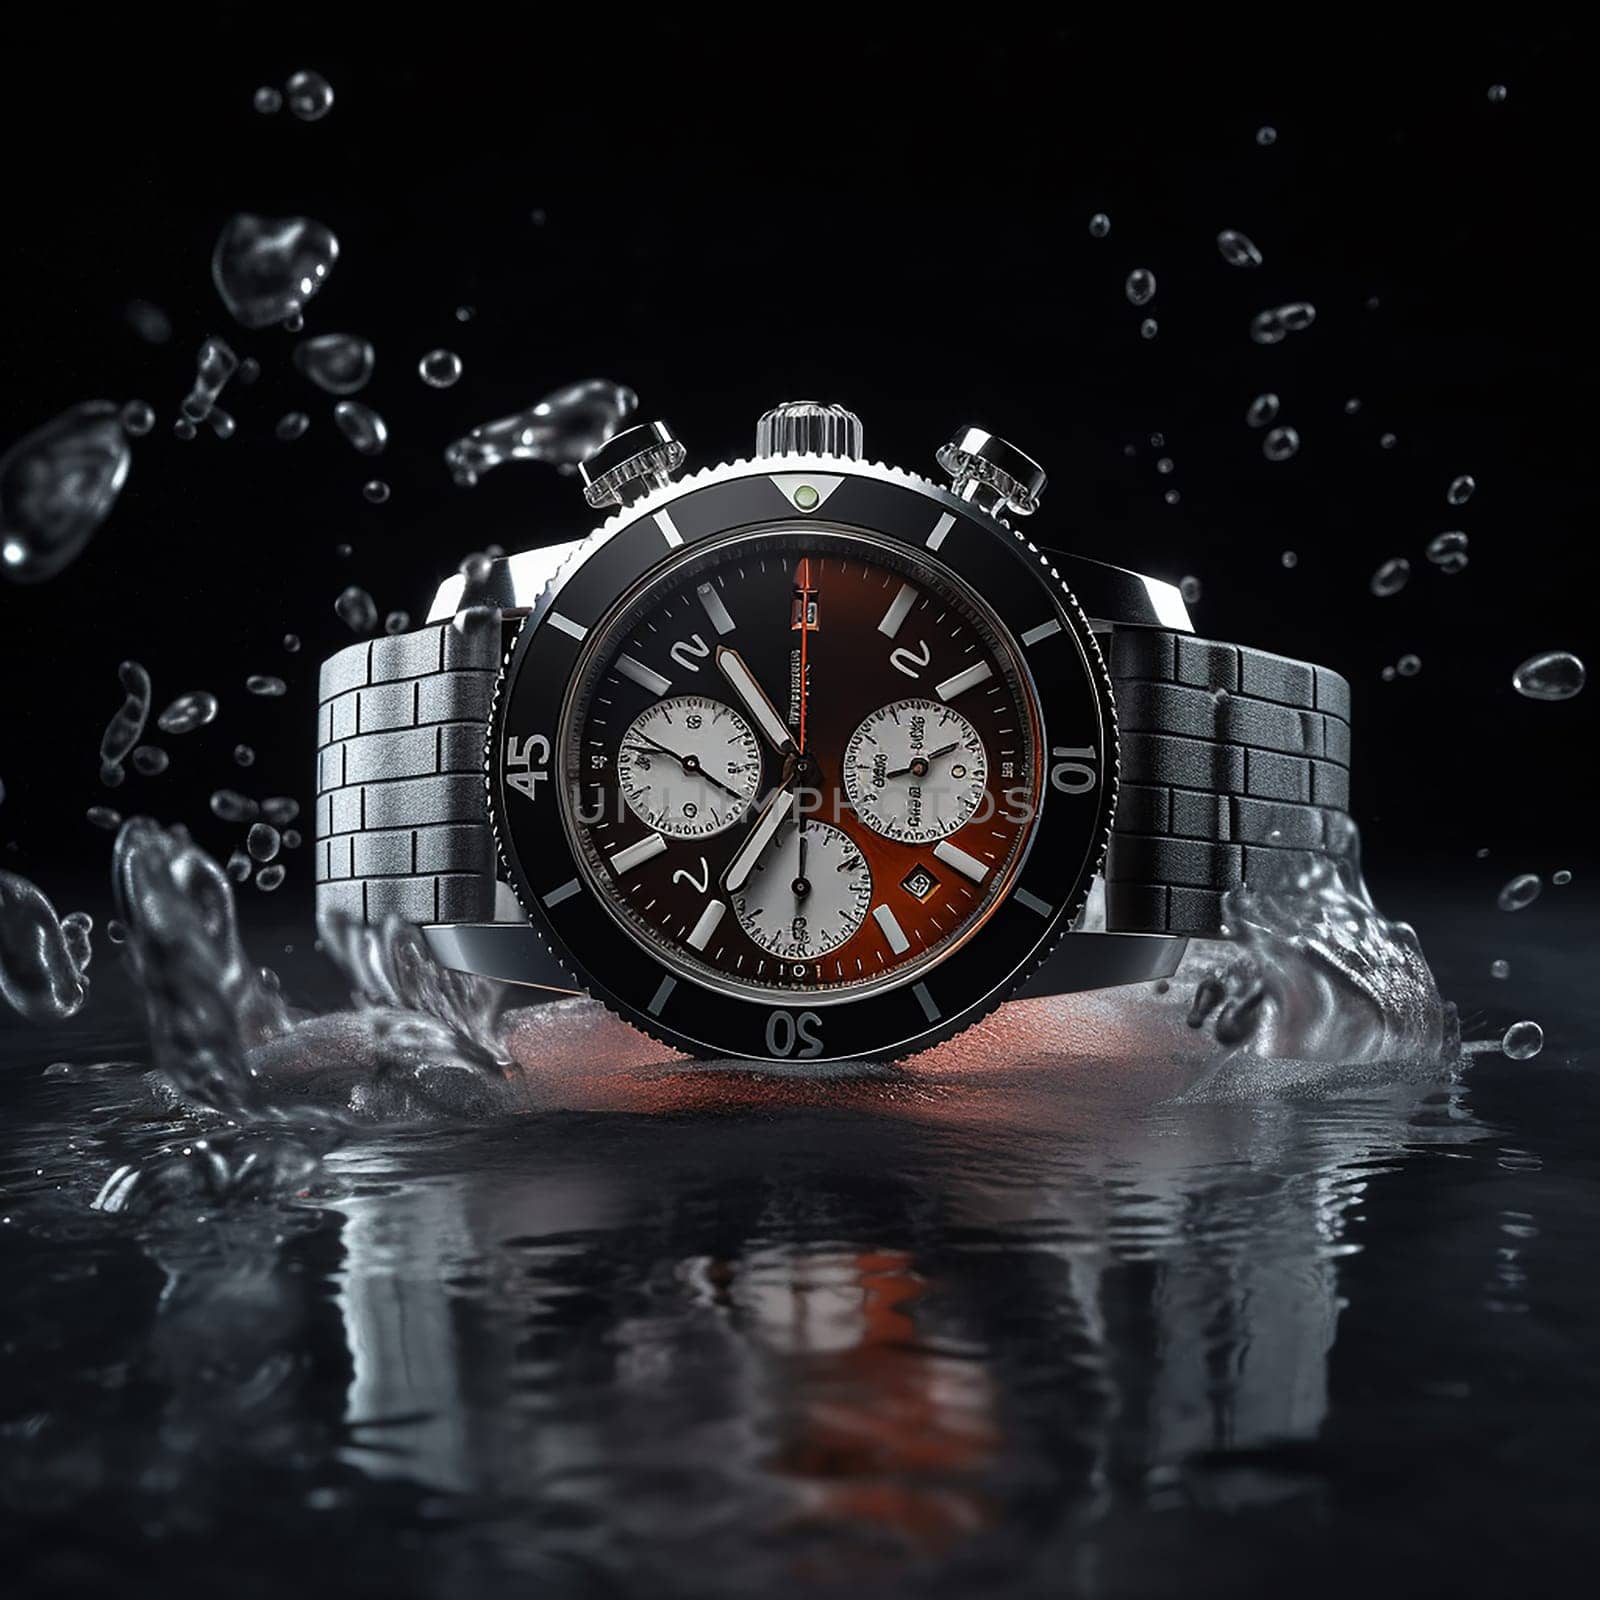 Chronograph wristwatch with water splashes on dark background by Hype2art